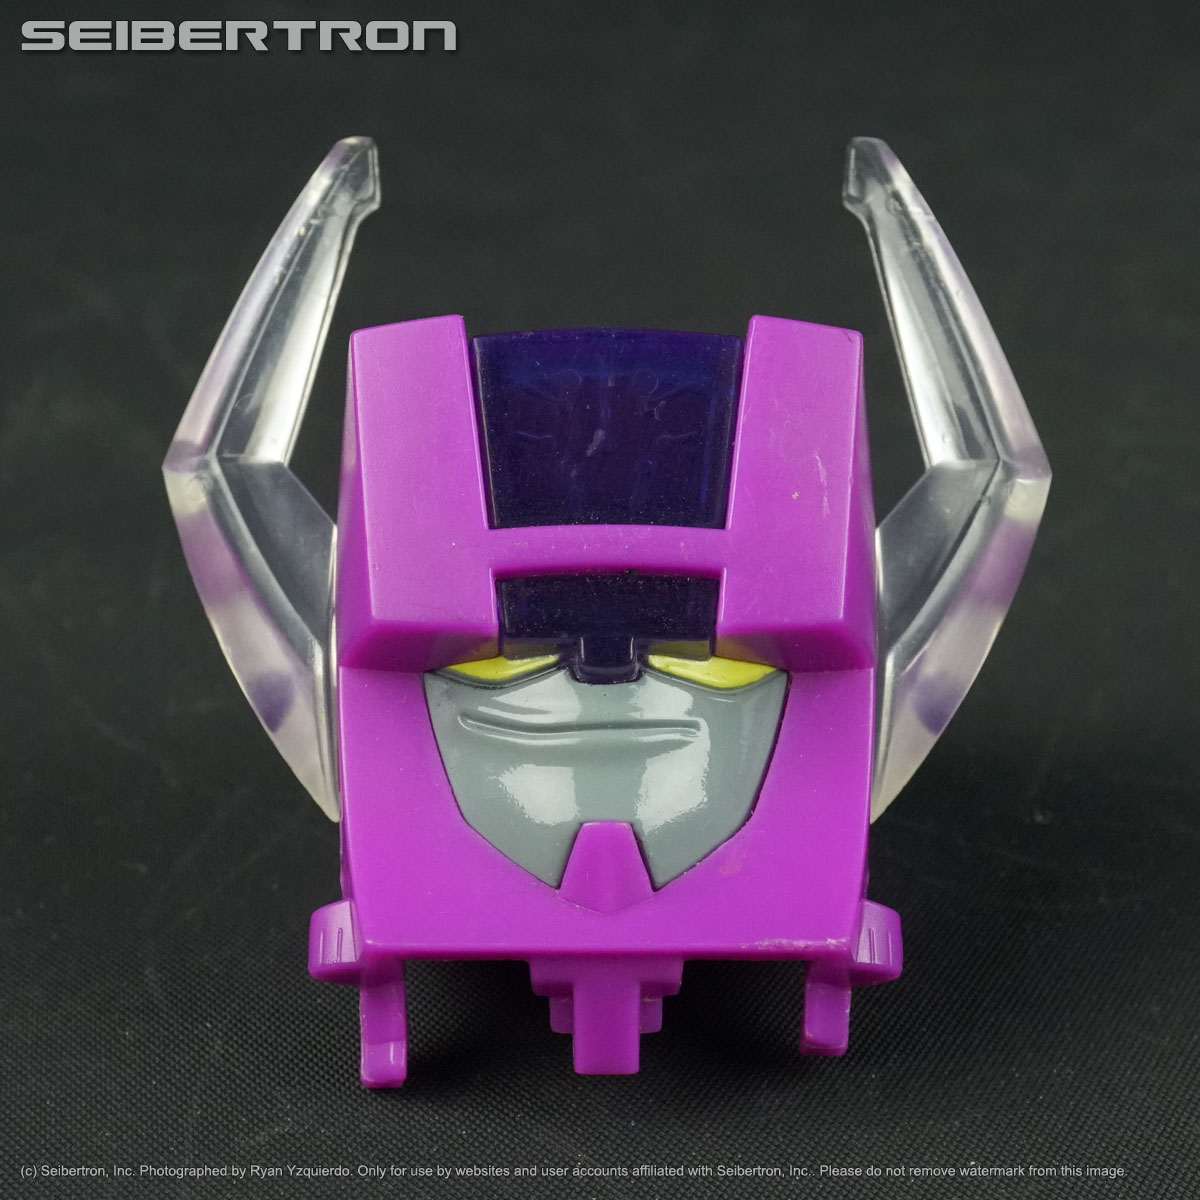 Transformers, Masters of the Universe, Teenage Mutant Ninja Turtles, Gobots, Comic Books, Shopkins, and other listings from Seibertron.com: HEADMASTER accessory Transformers Animated Bulkhead Leader Class 2008 Hasbro